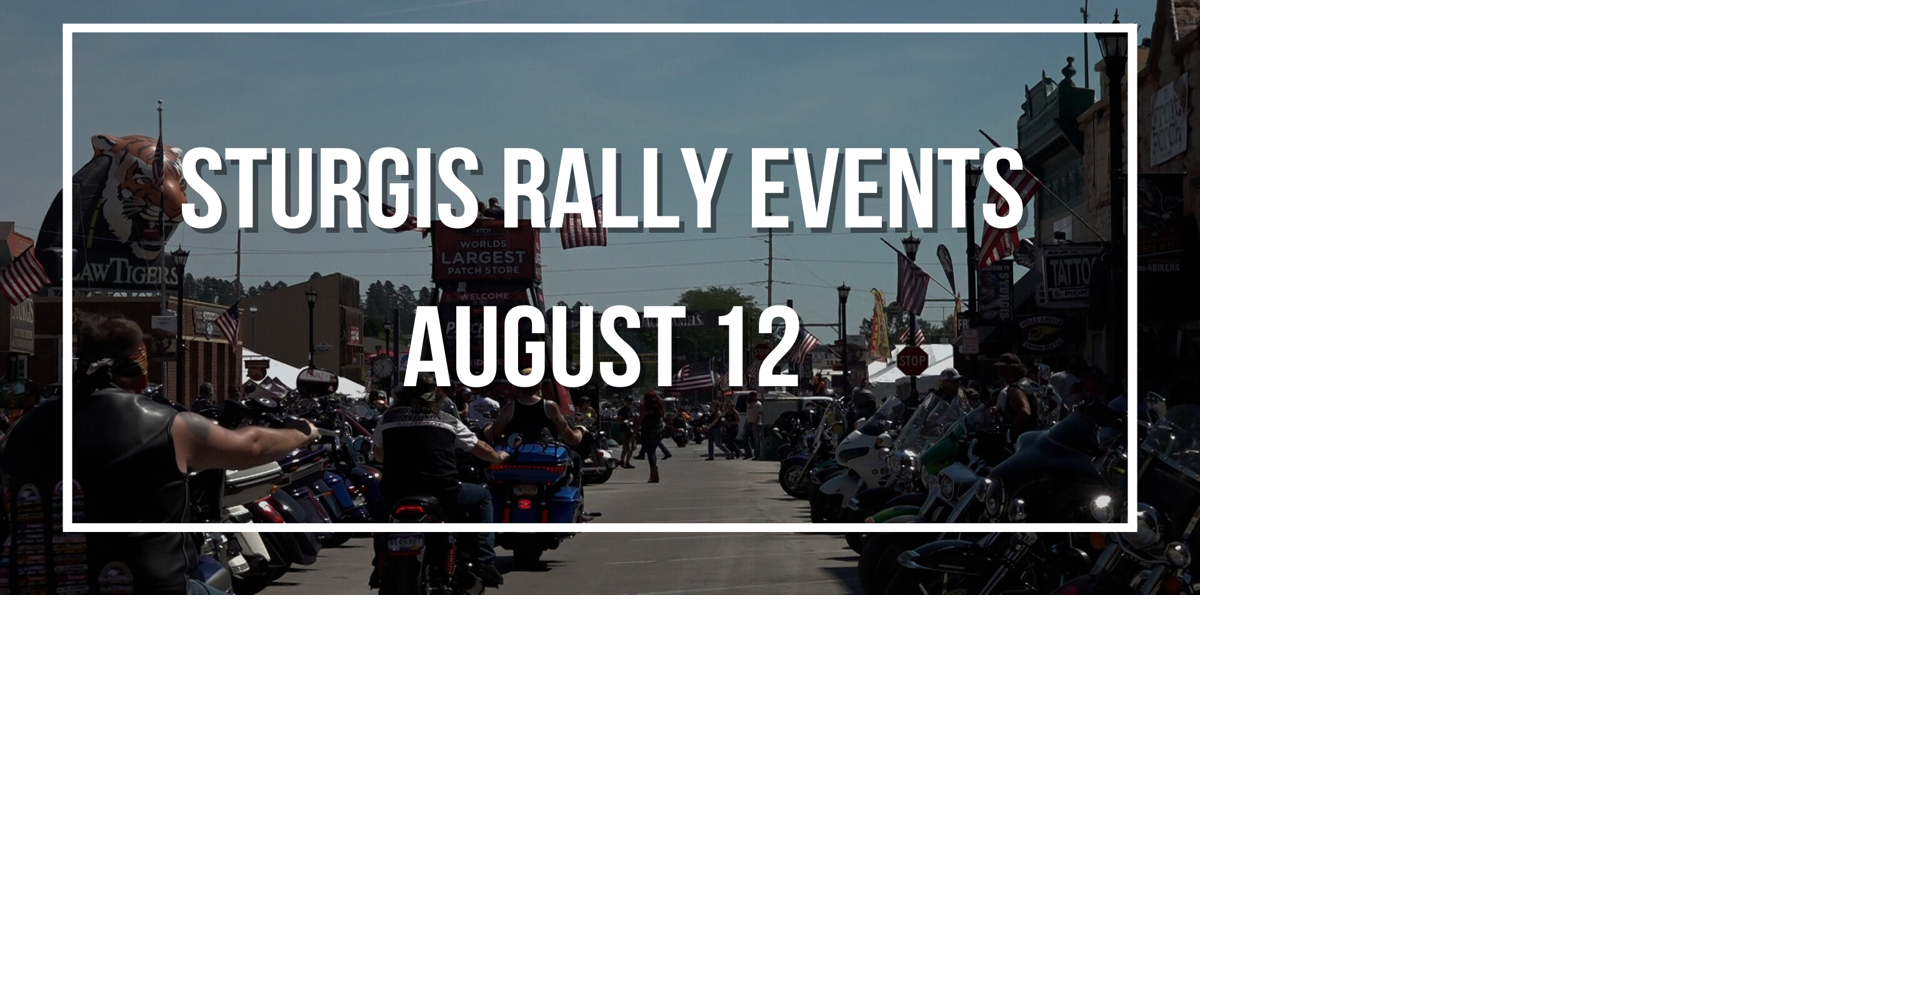 Sturgis Rally Events & Concerts August 12 Events newscenter1.tv